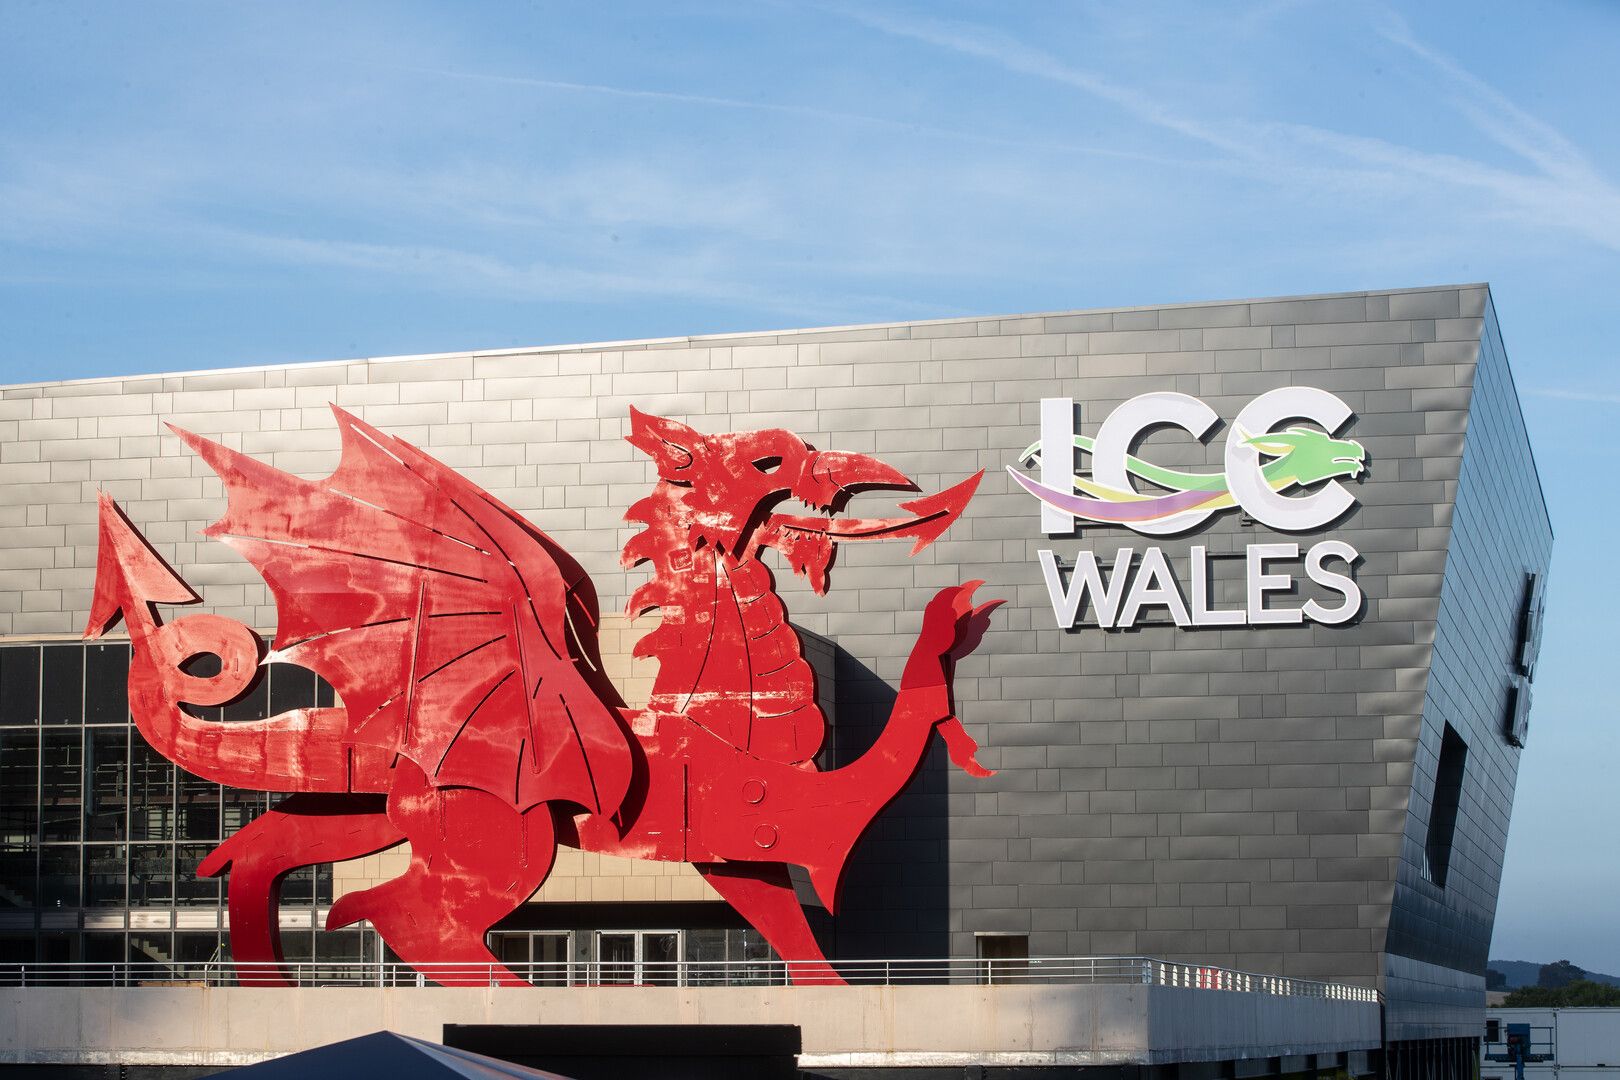 ICC Wales champions nature and sustainability in events as it exhibits at The Meetings Show